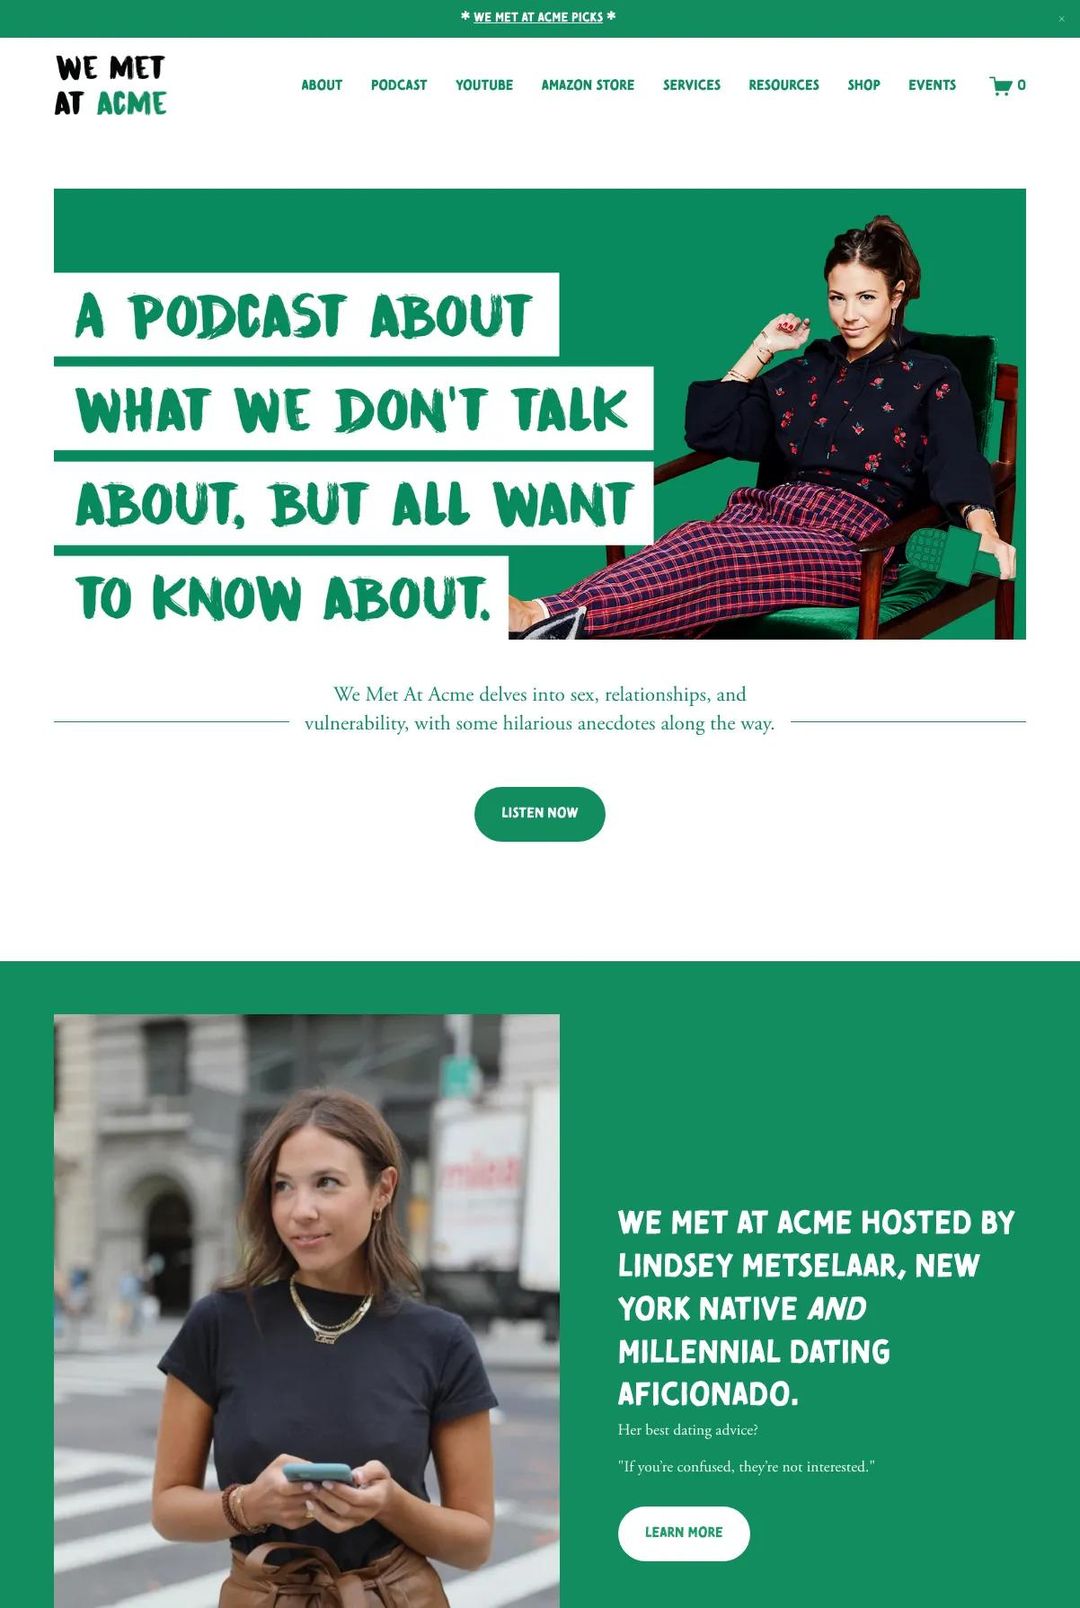 Screenshot 1 of We Met At Acme (Example Squarespace Podcast Website)